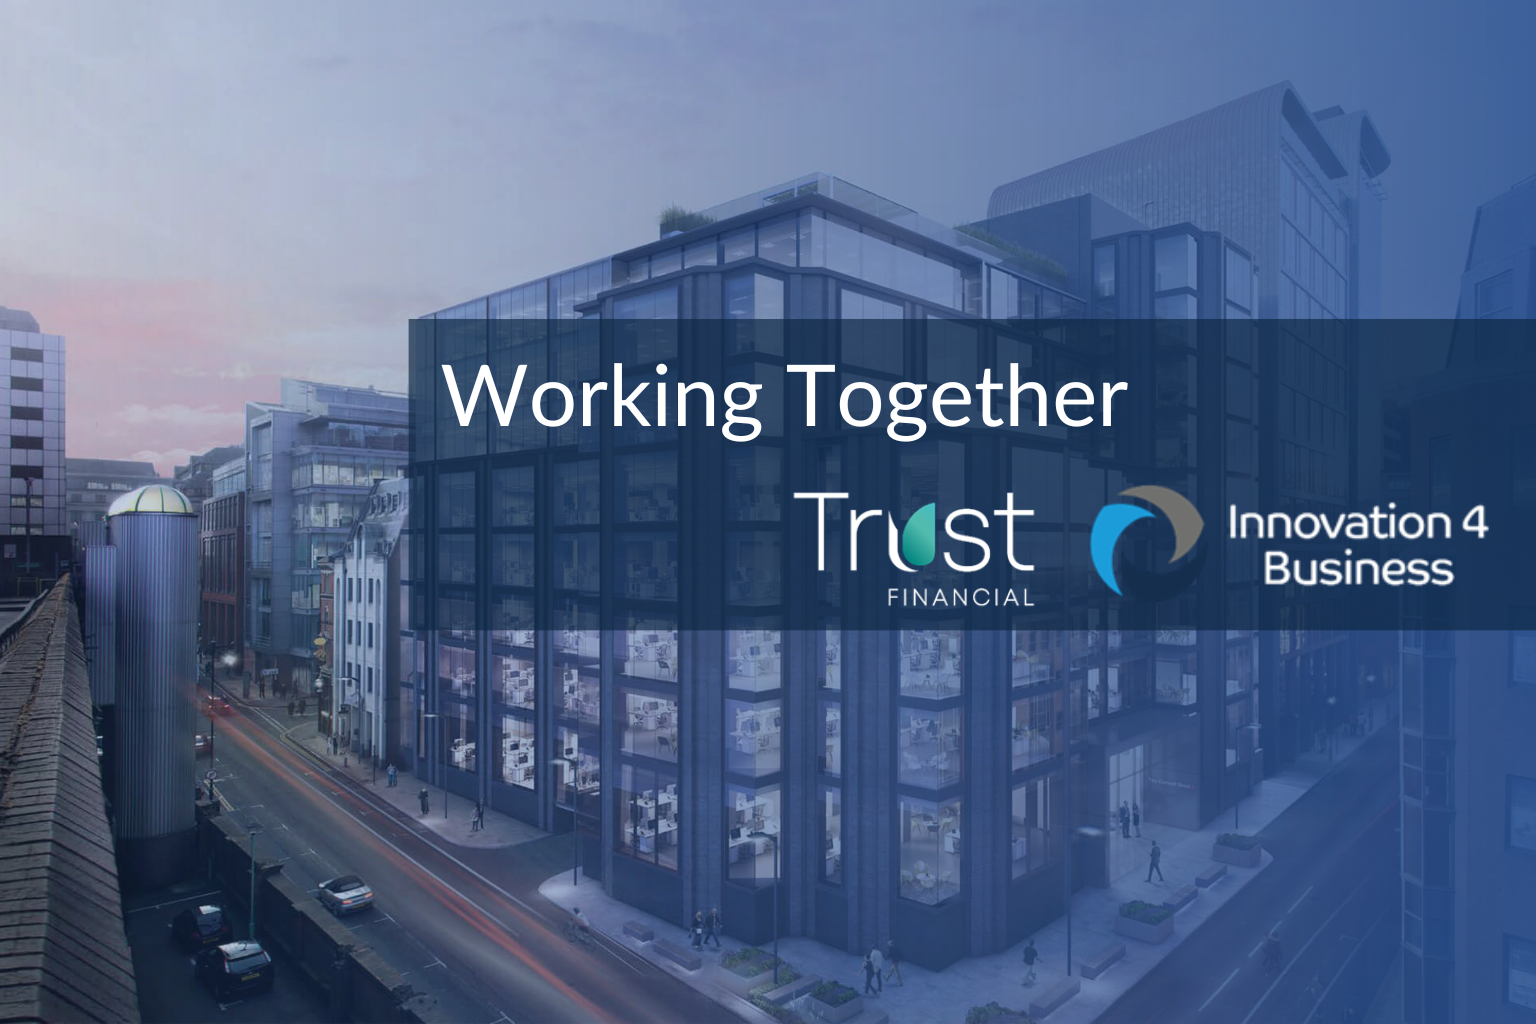 Innovation 4 Business & Trust Financial – Working Together